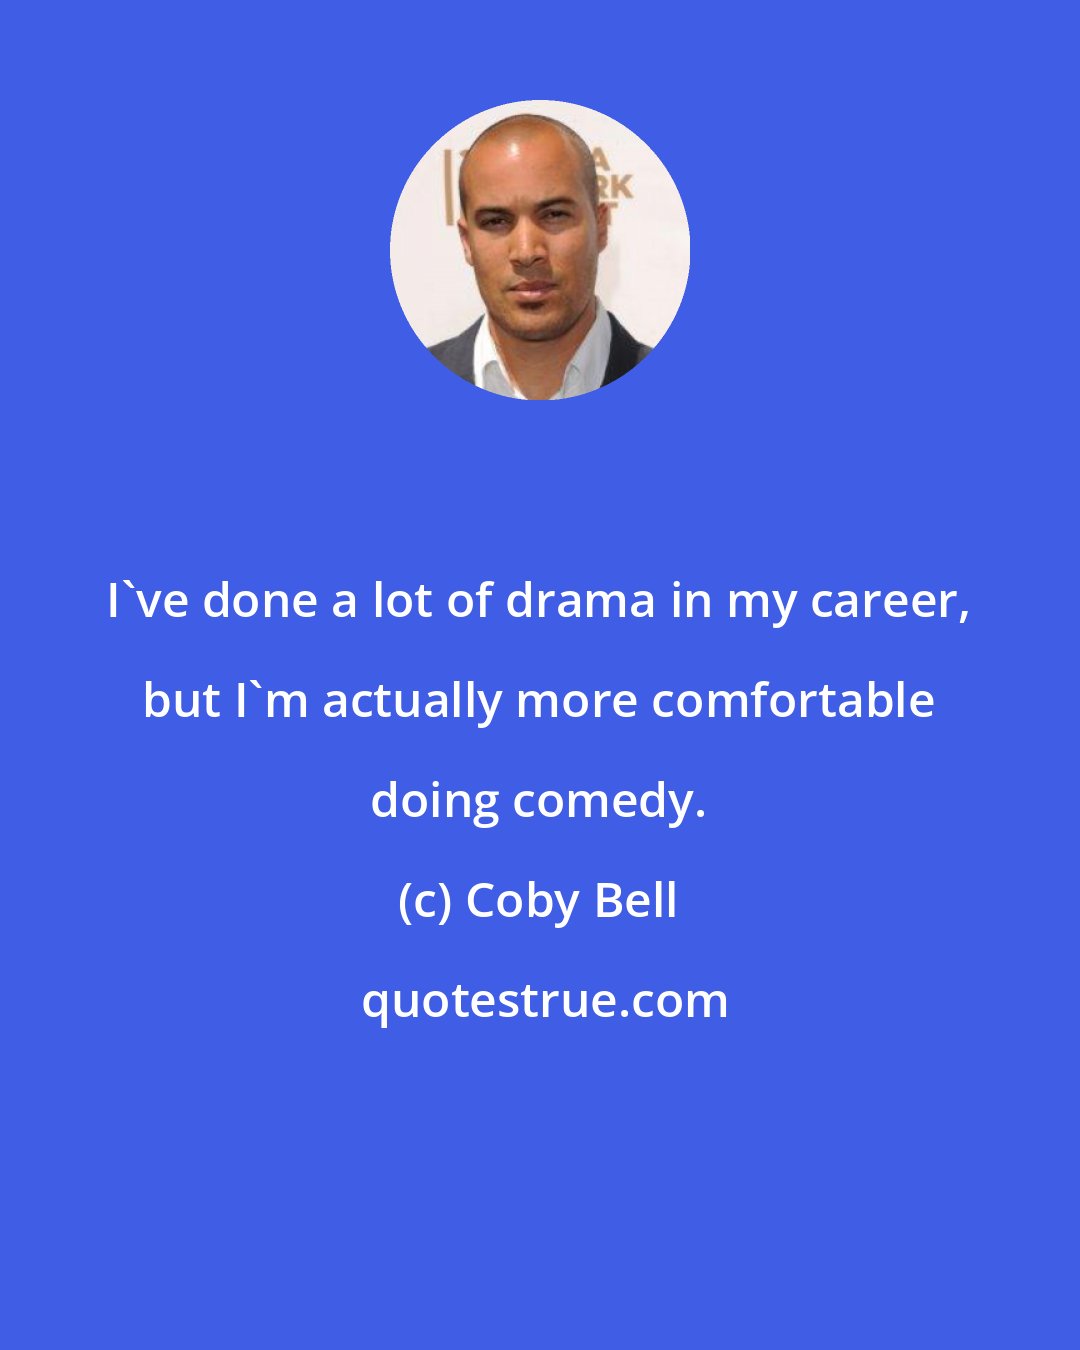 Coby Bell: I've done a lot of drama in my career, but I'm actually more comfortable doing comedy.